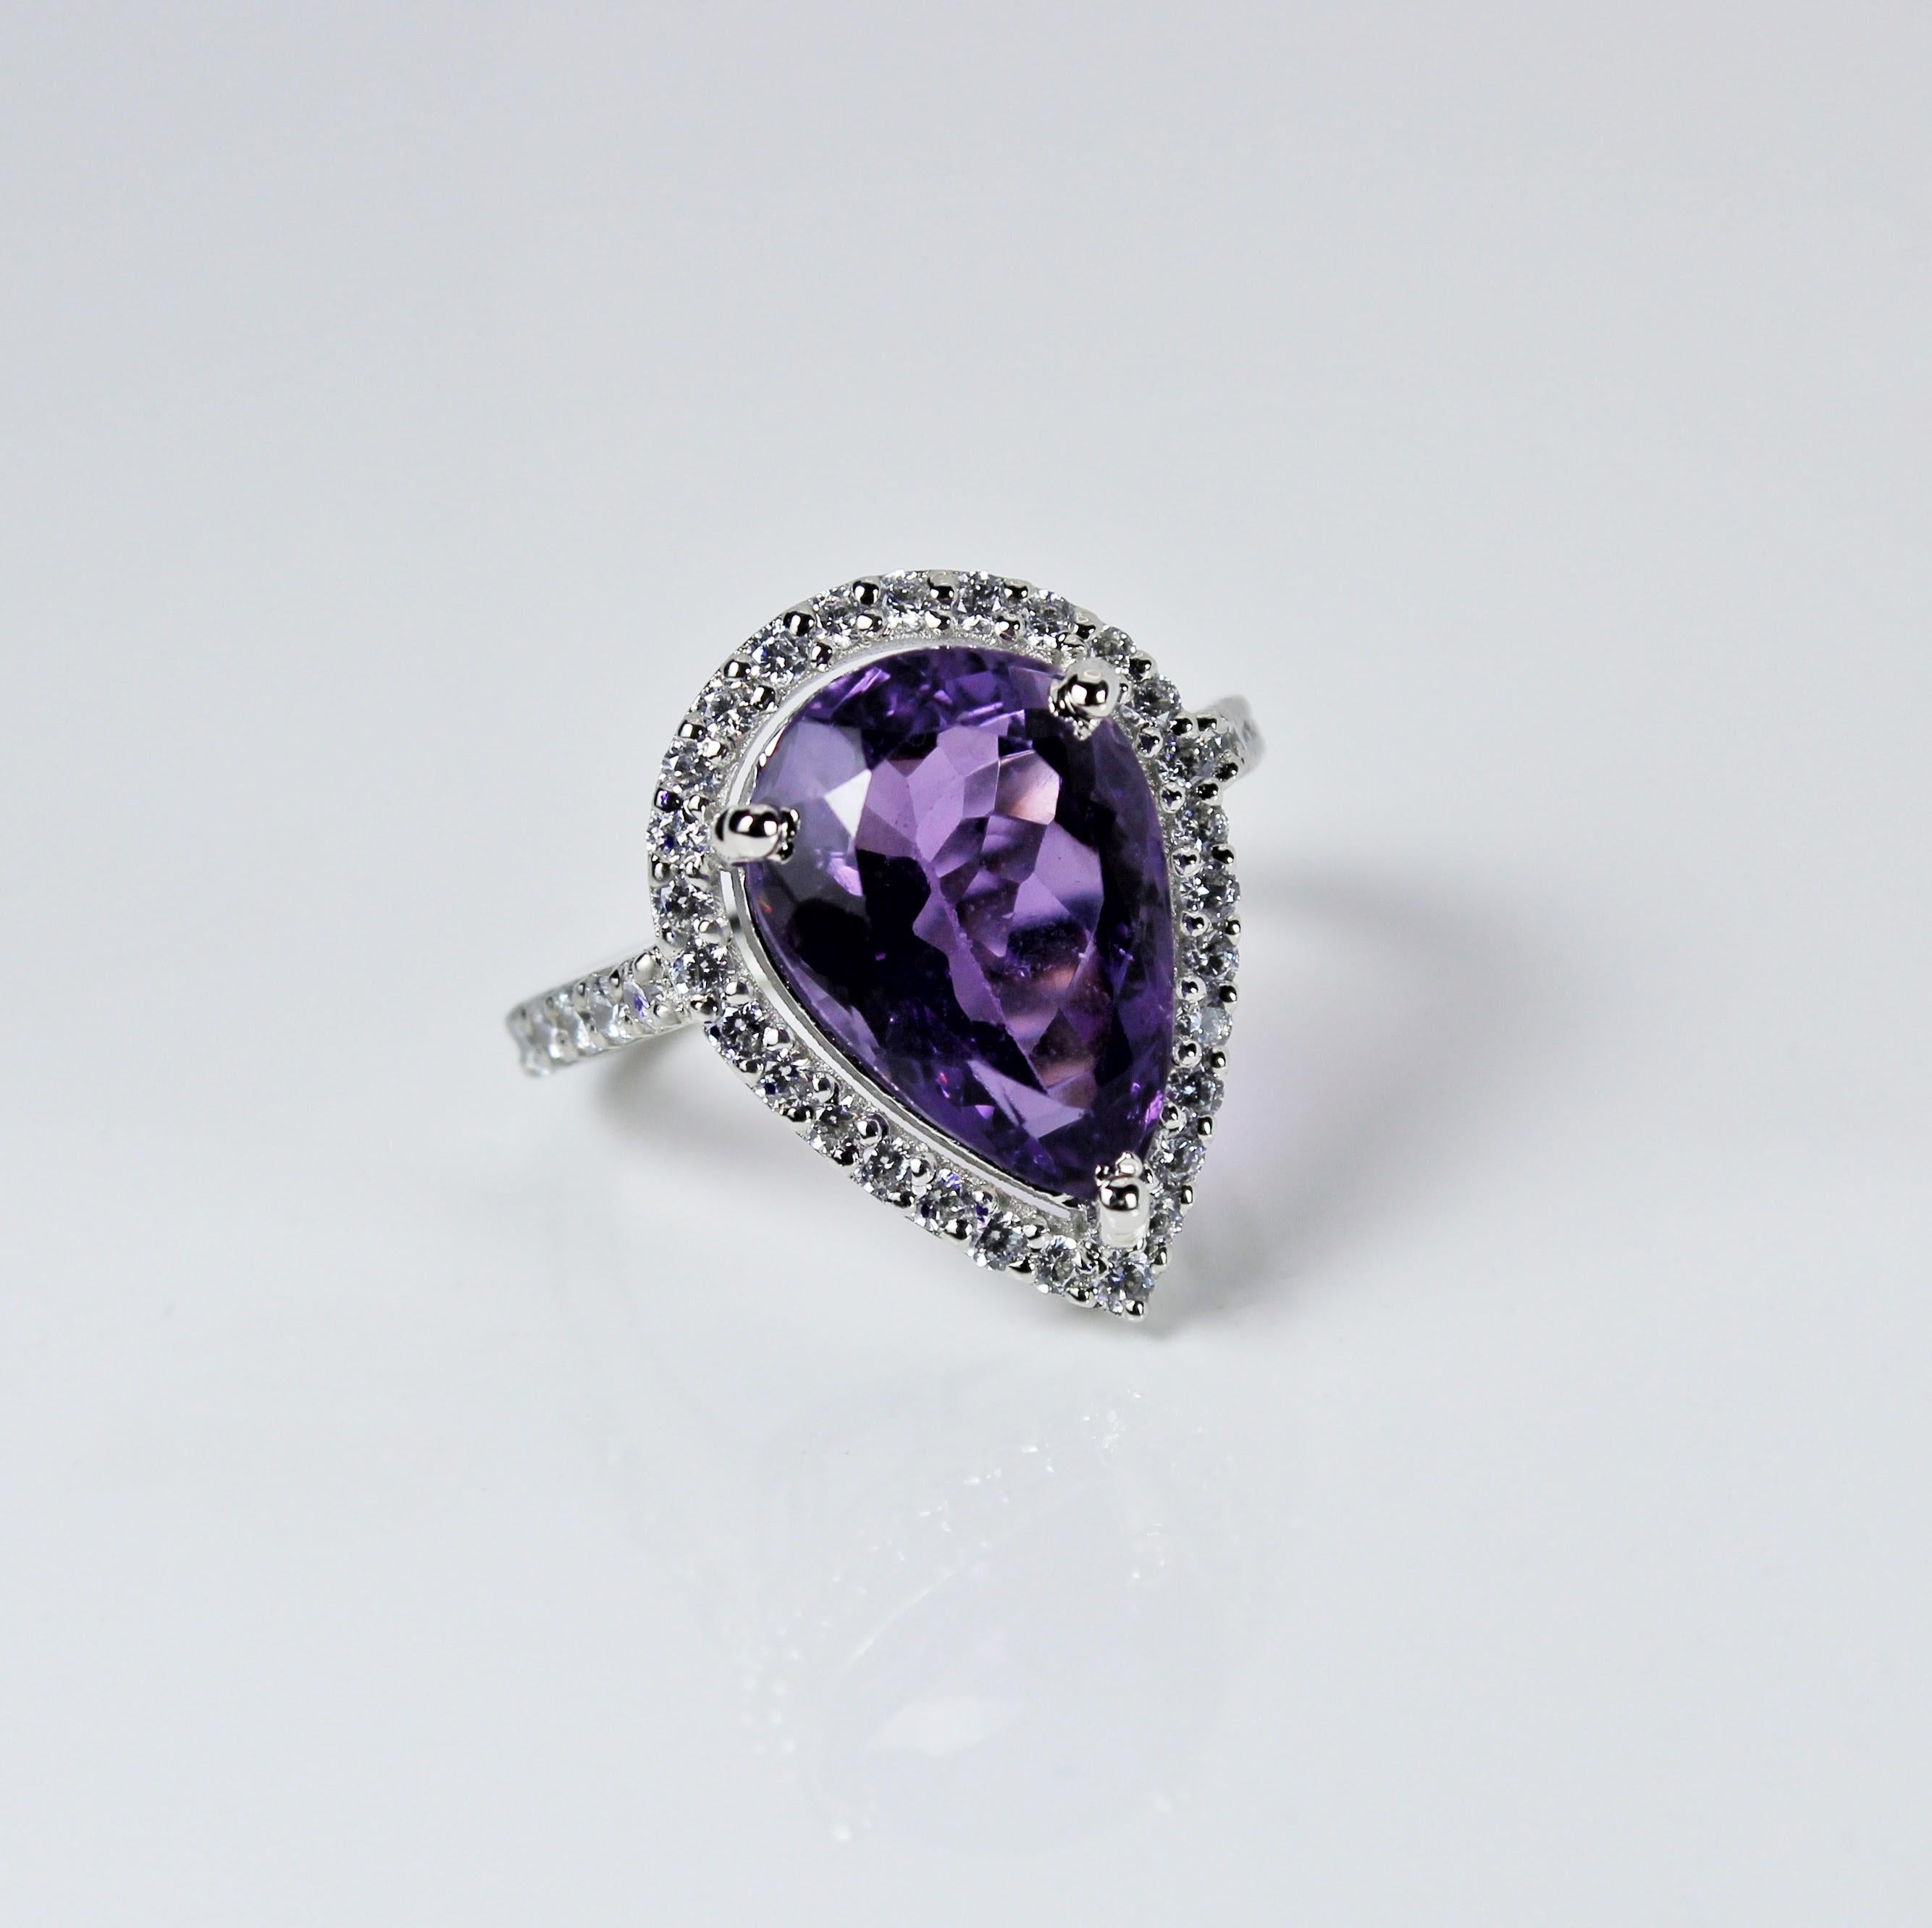 Product Details:

Metal - Silver
Indian ring size - 10
Product gross Weight - 5.350 Grams
Gemstone - Amethyst
Stone weight - 6.95 Carat
Stone shape - Pear
Stone size - 14 x 10 mm

The faceted amethyst gemstone catches the light beautifully, creating